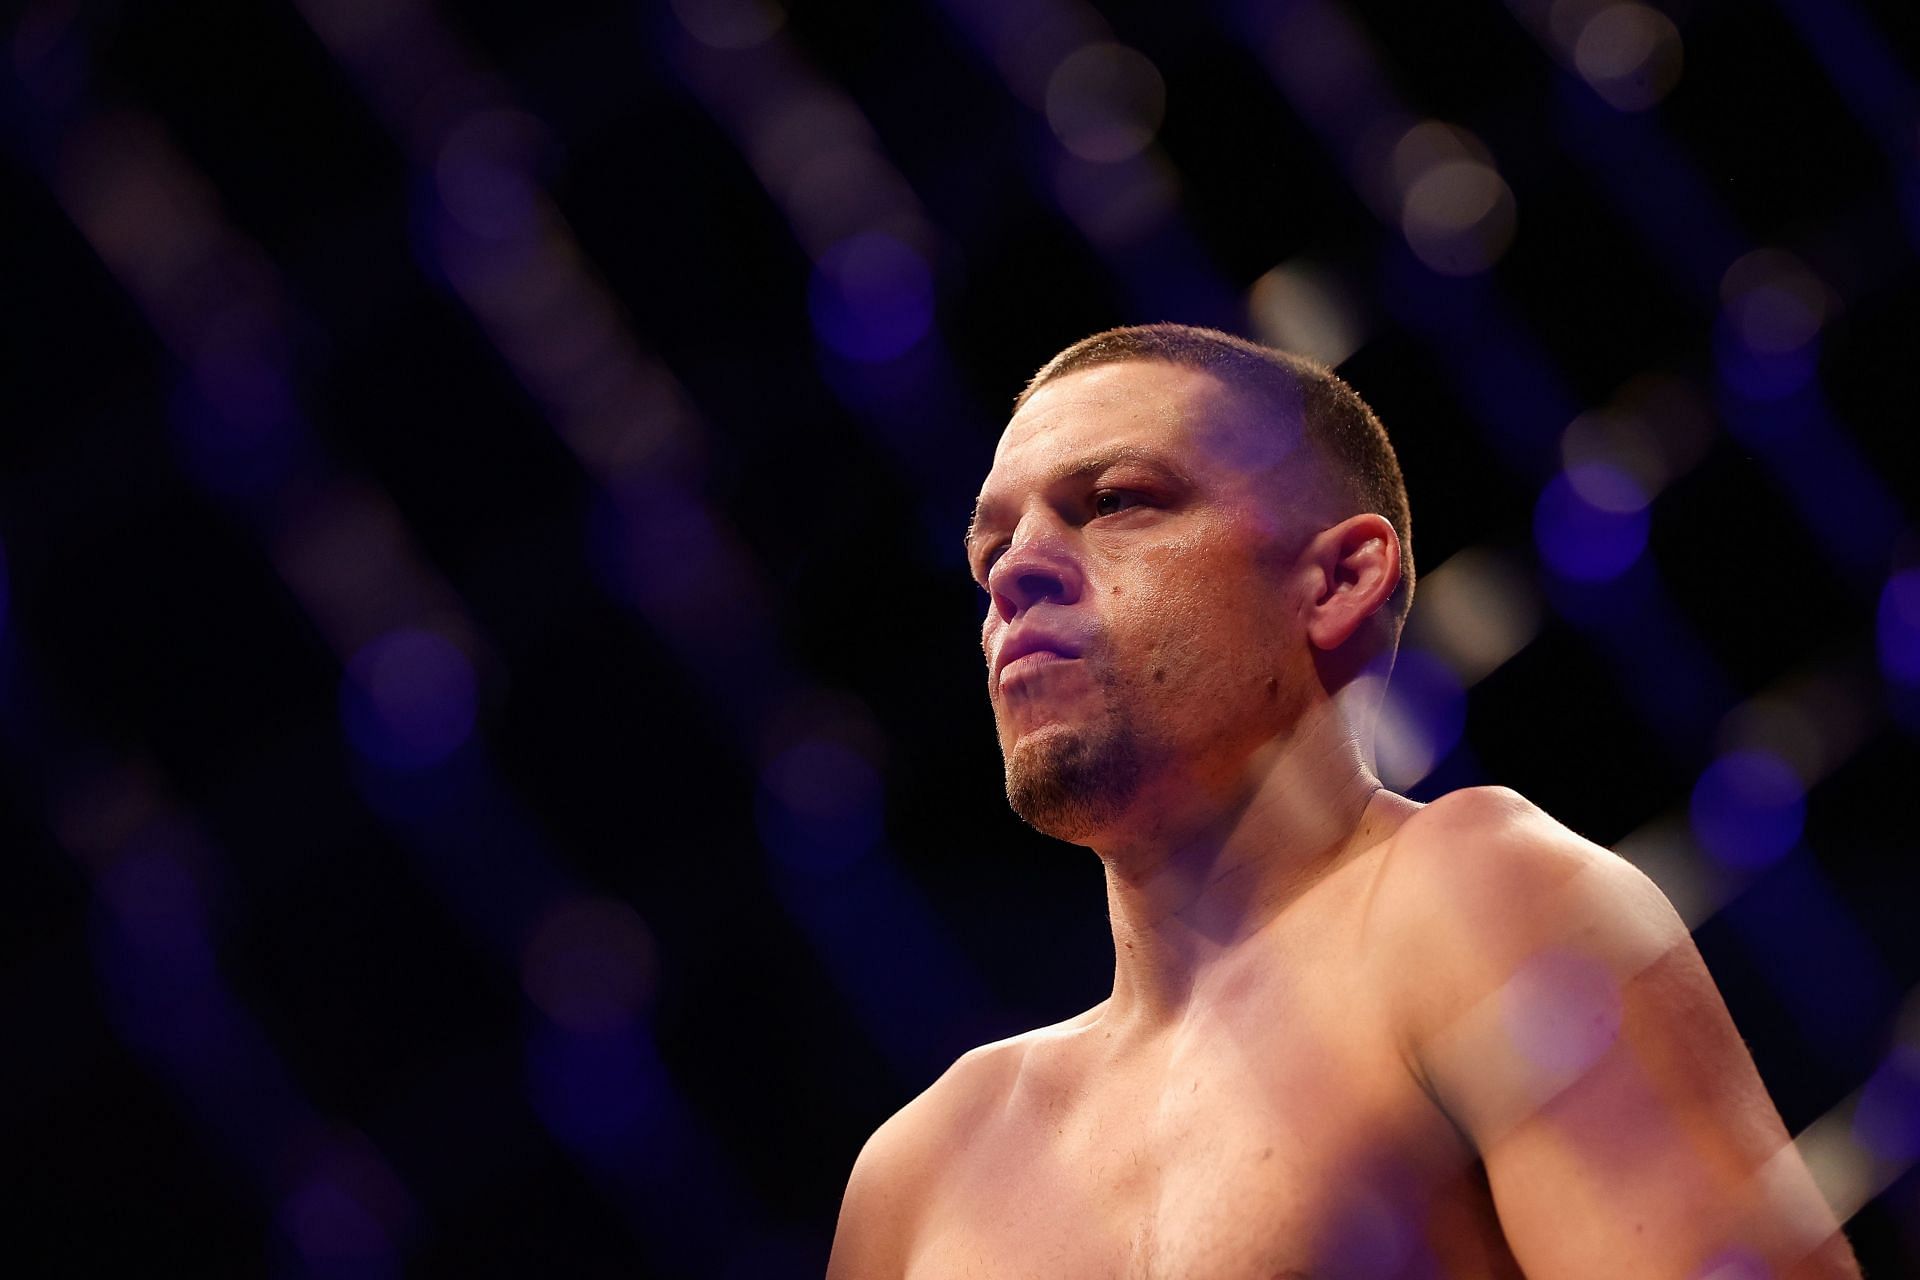 What are Nate Diaz's plans after leaving the UFC?